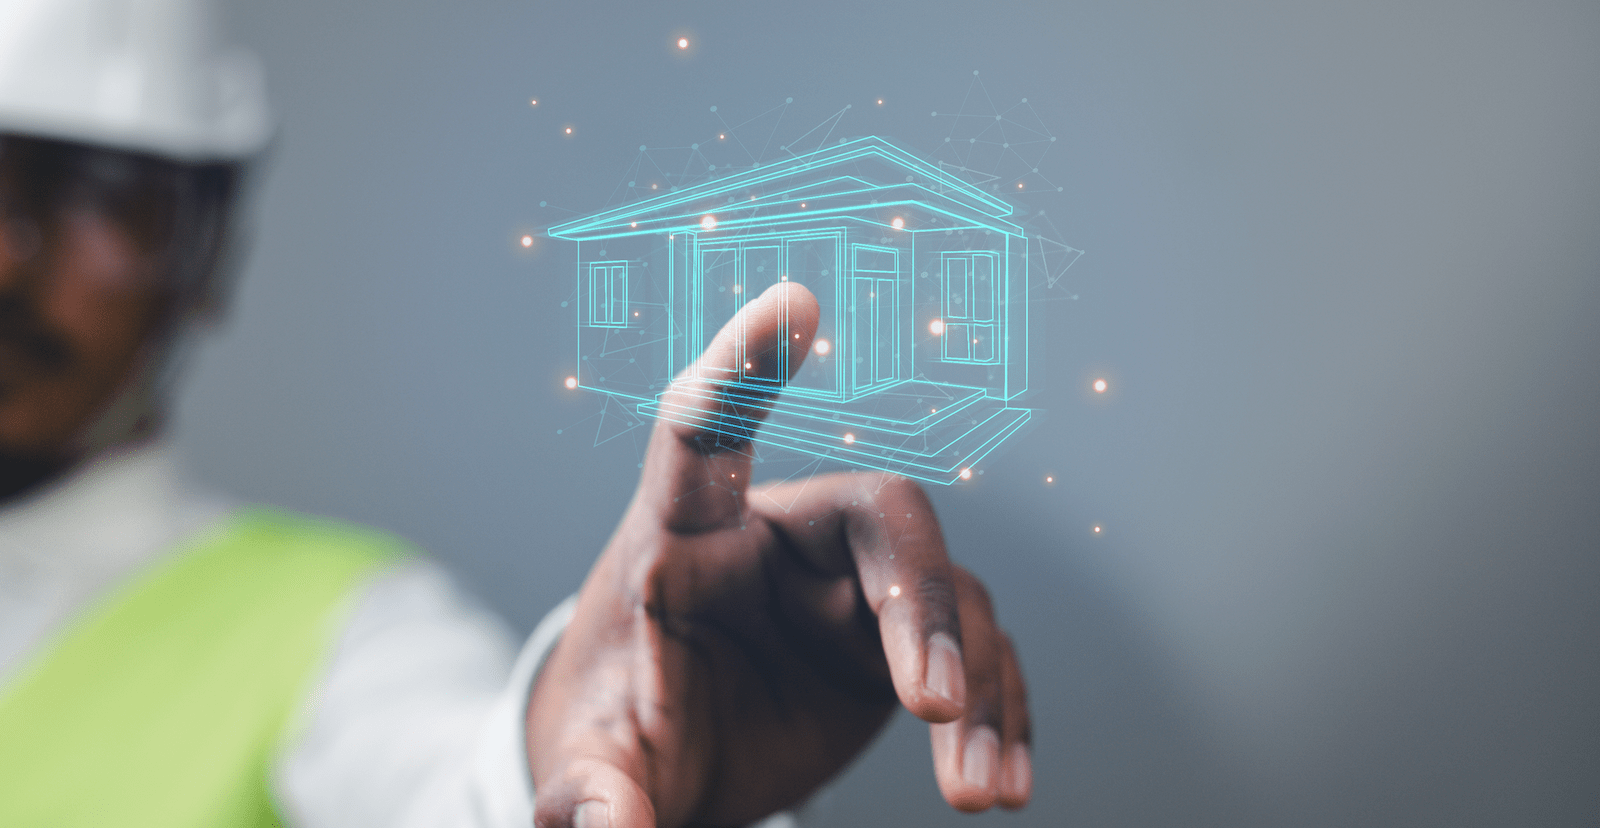 Man's hand reaching toward building information modeling home floating in air